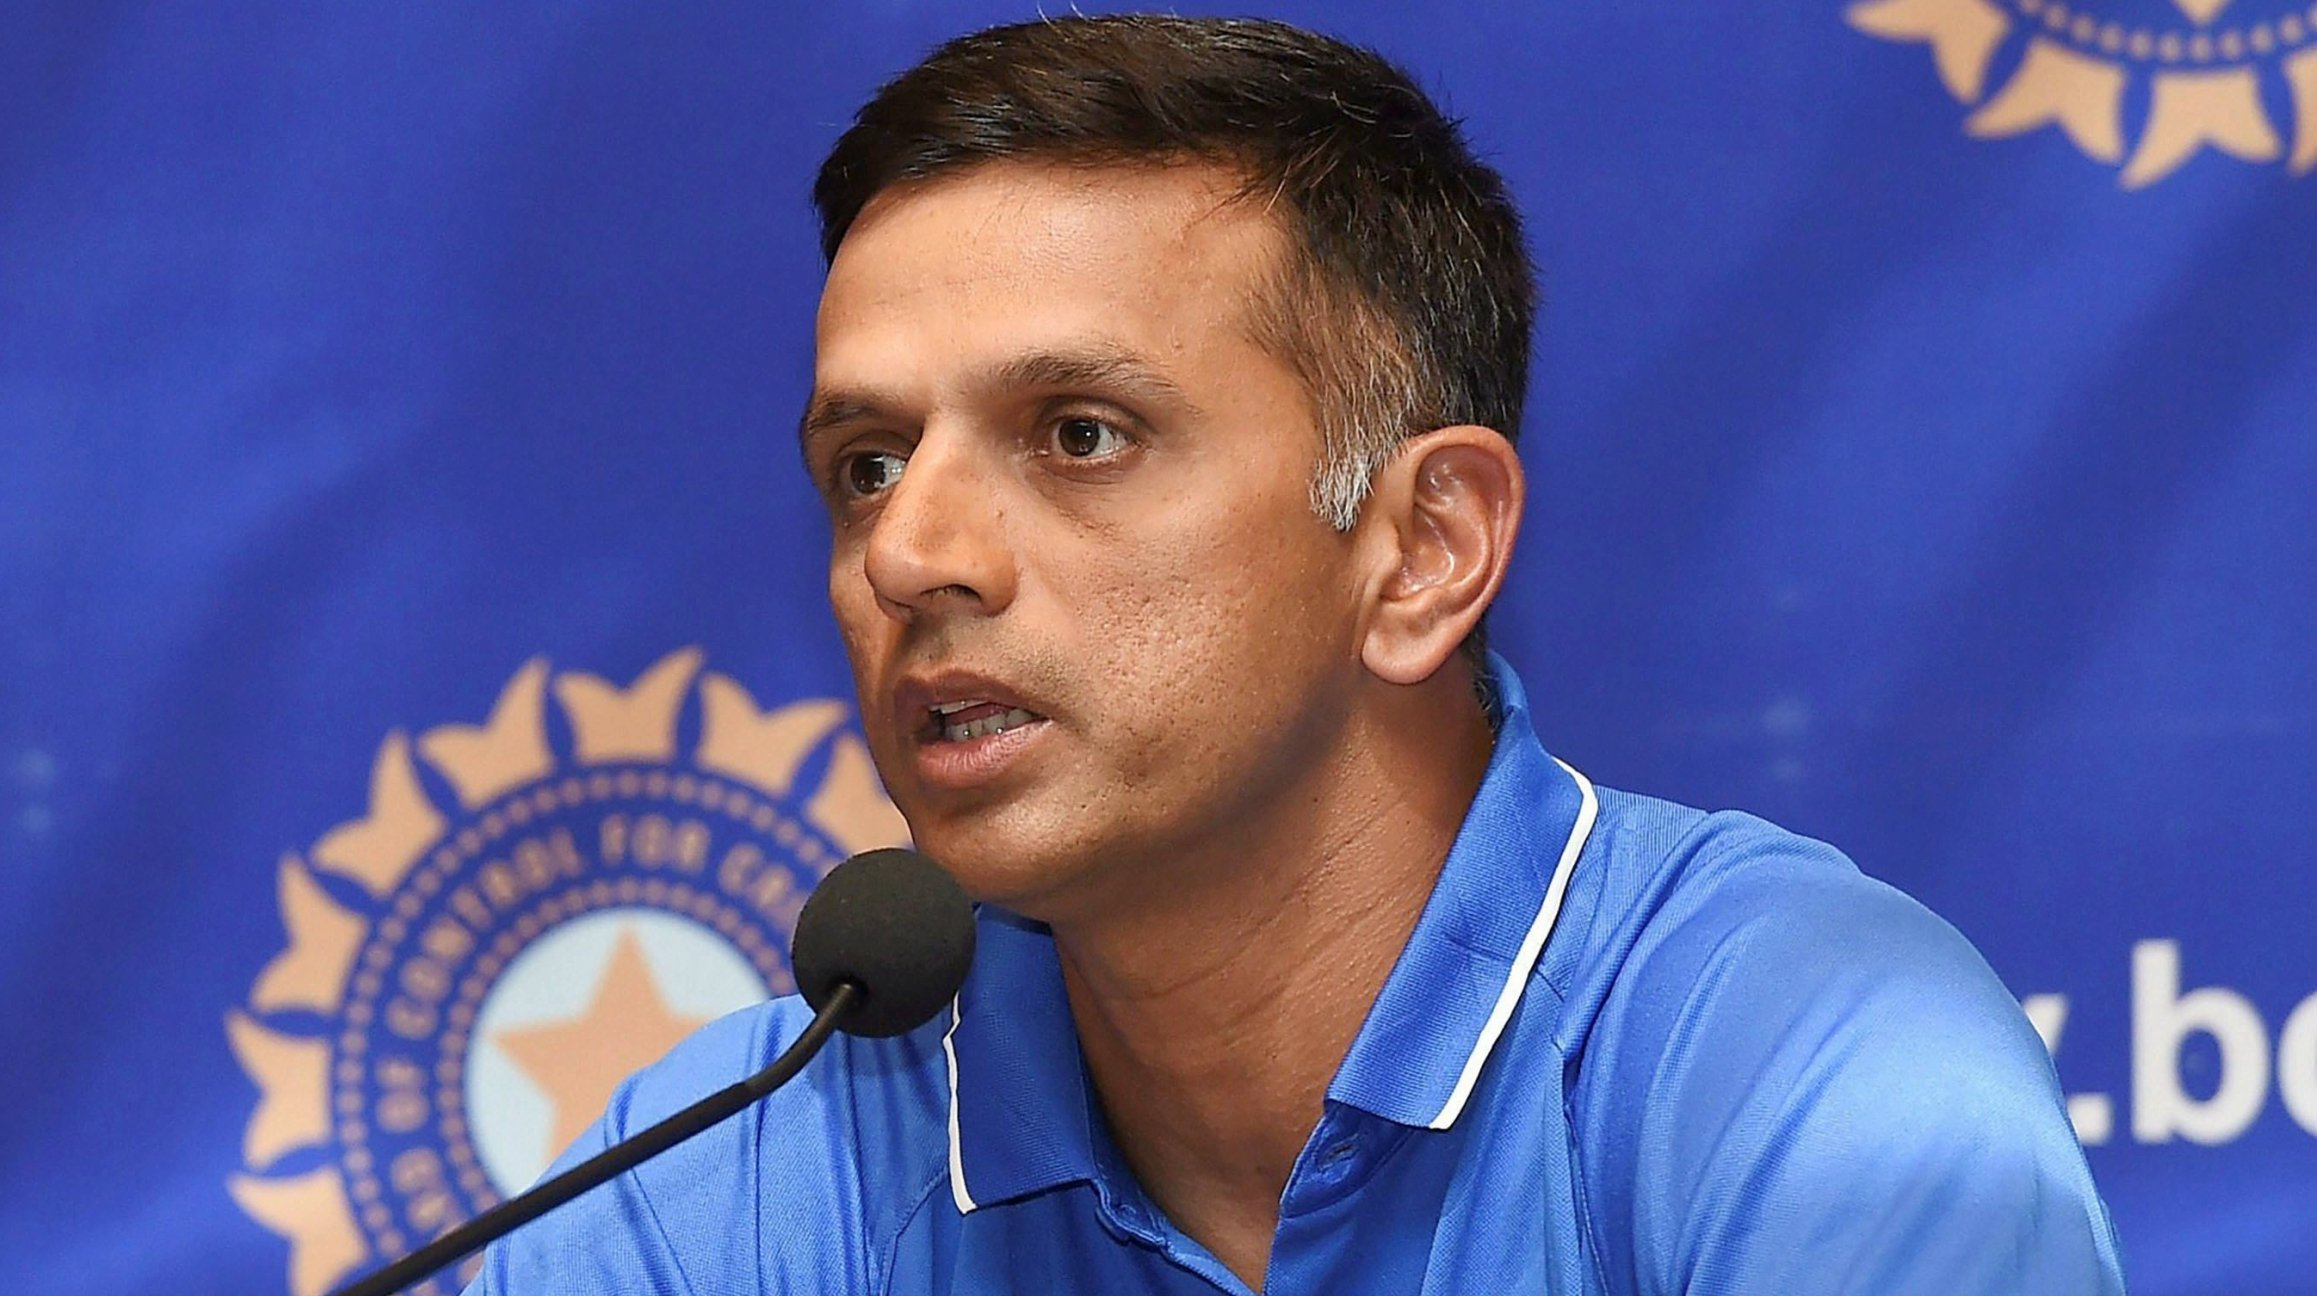 BCCI appoints Rahul Dravid as Head of Cricket at National Cricket Academy